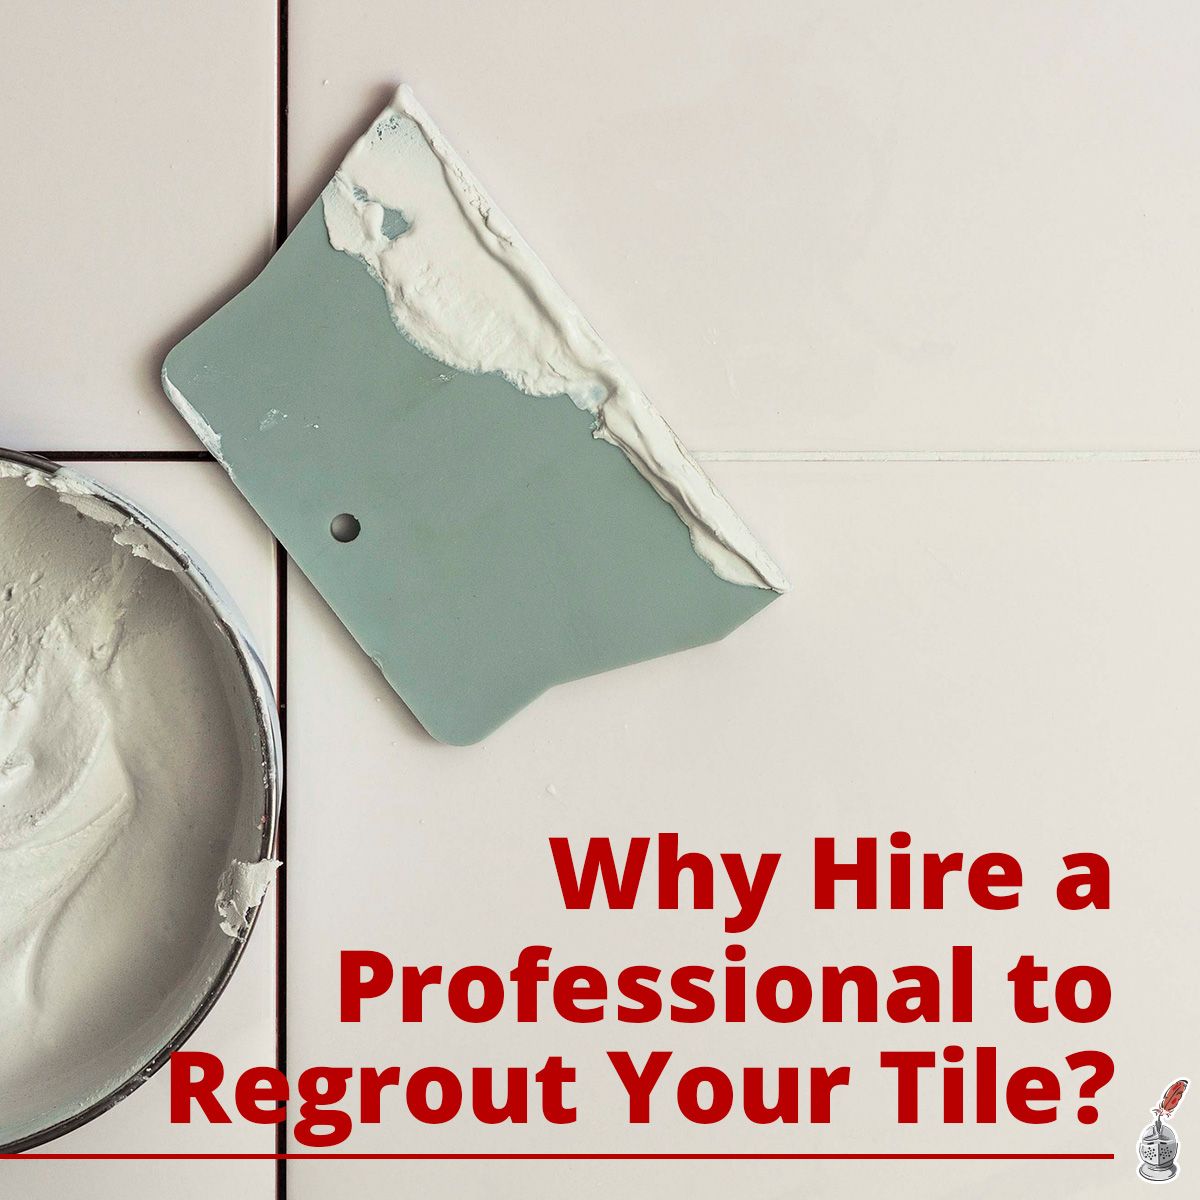 Why Hire a Professional to Regrout Your Tile?